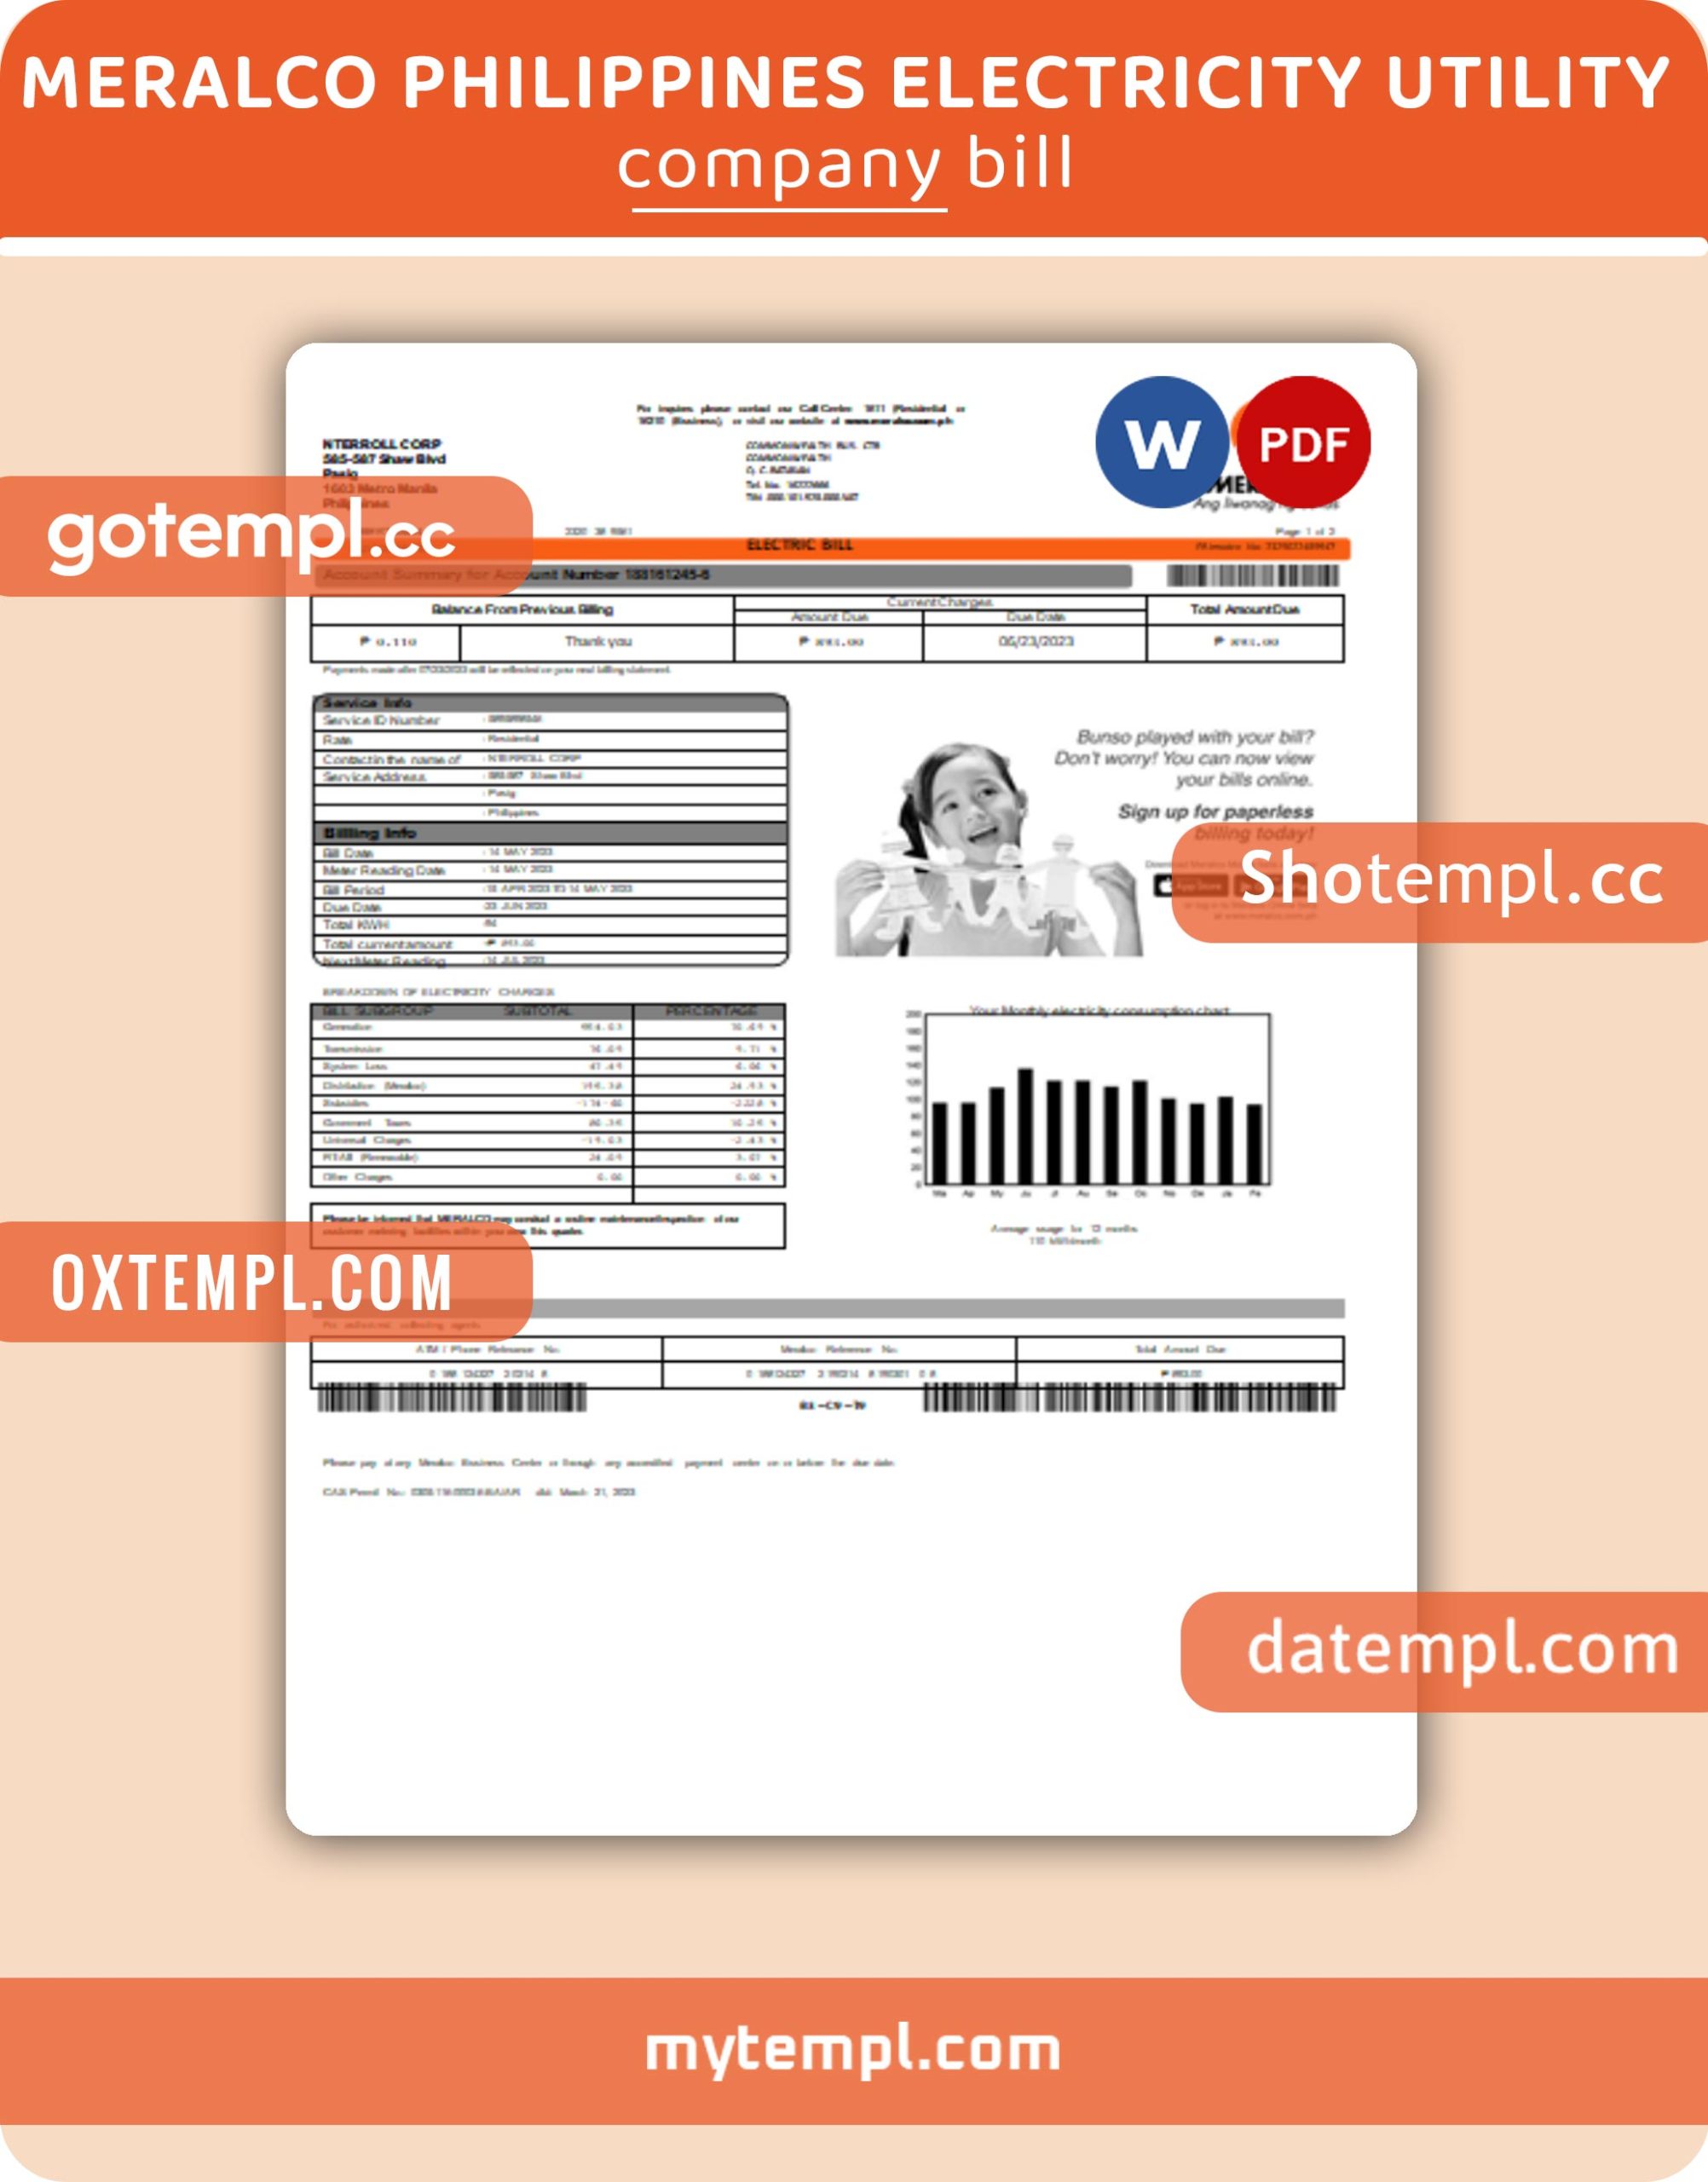 Guatemala Azteca bank statement Excel and PDF template